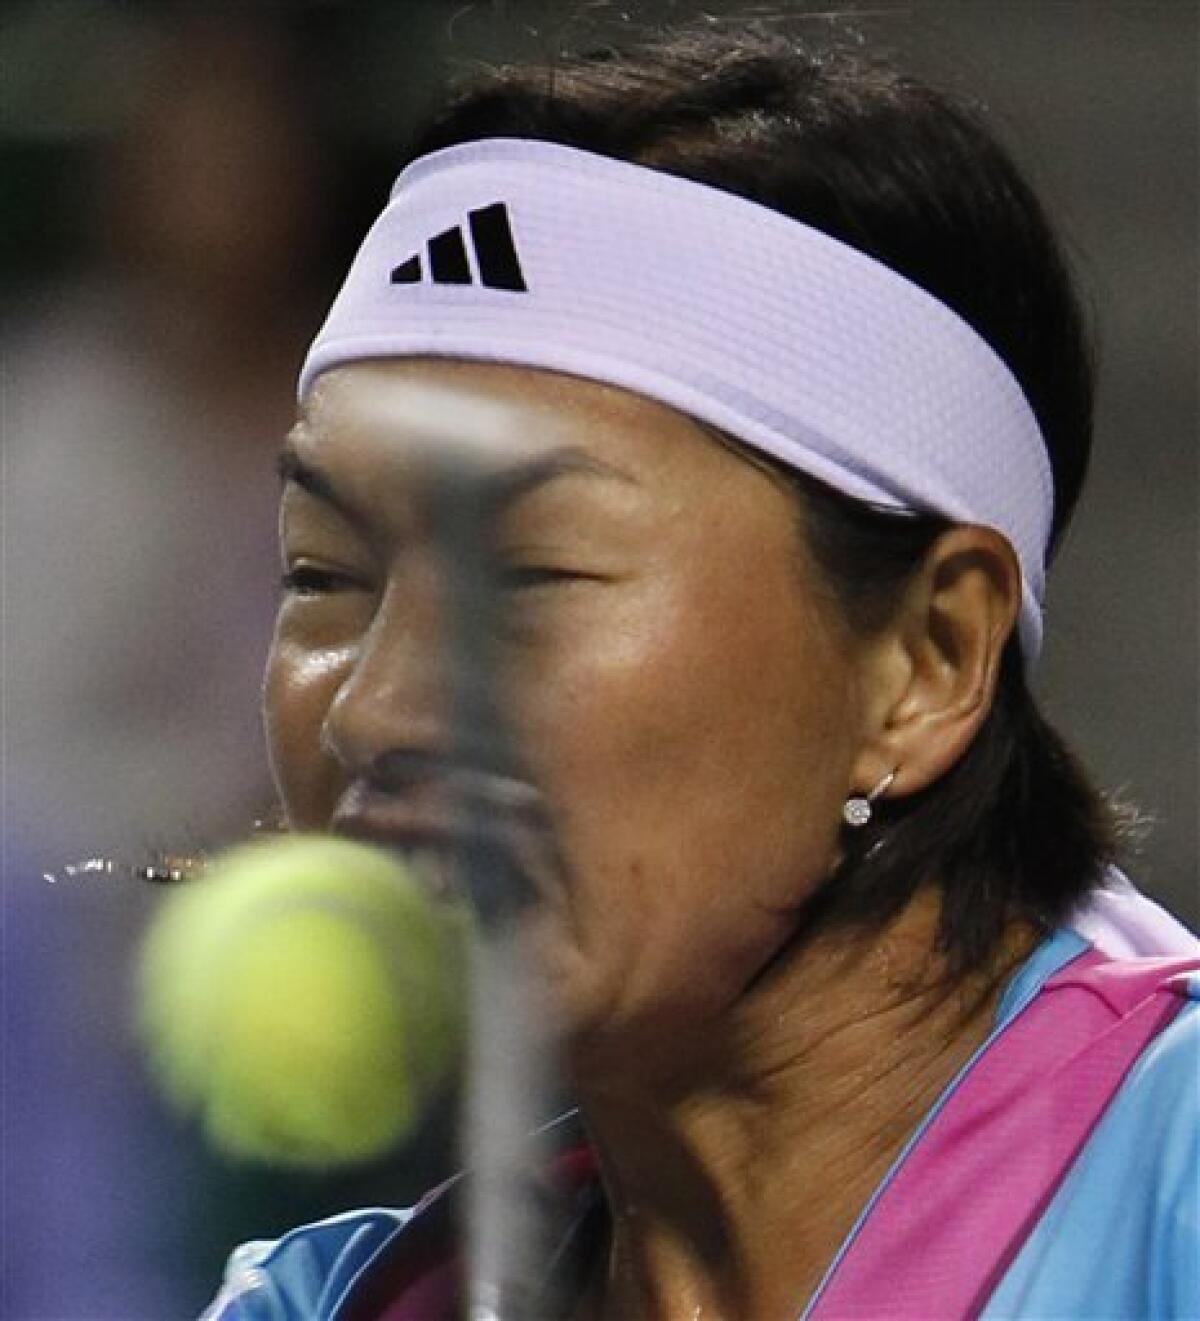 Kimiko Date-Krumm of Japan returns a ball to Mandy Minella of Luxembourg during the first round match of the Japan Pan Pacific Open tennis tournament in Tokyo, Monday, Sept. 26, 2011. Minella won 1-6, 6-3, 6-3. (AP Photo/Shizuo Kambayashi)